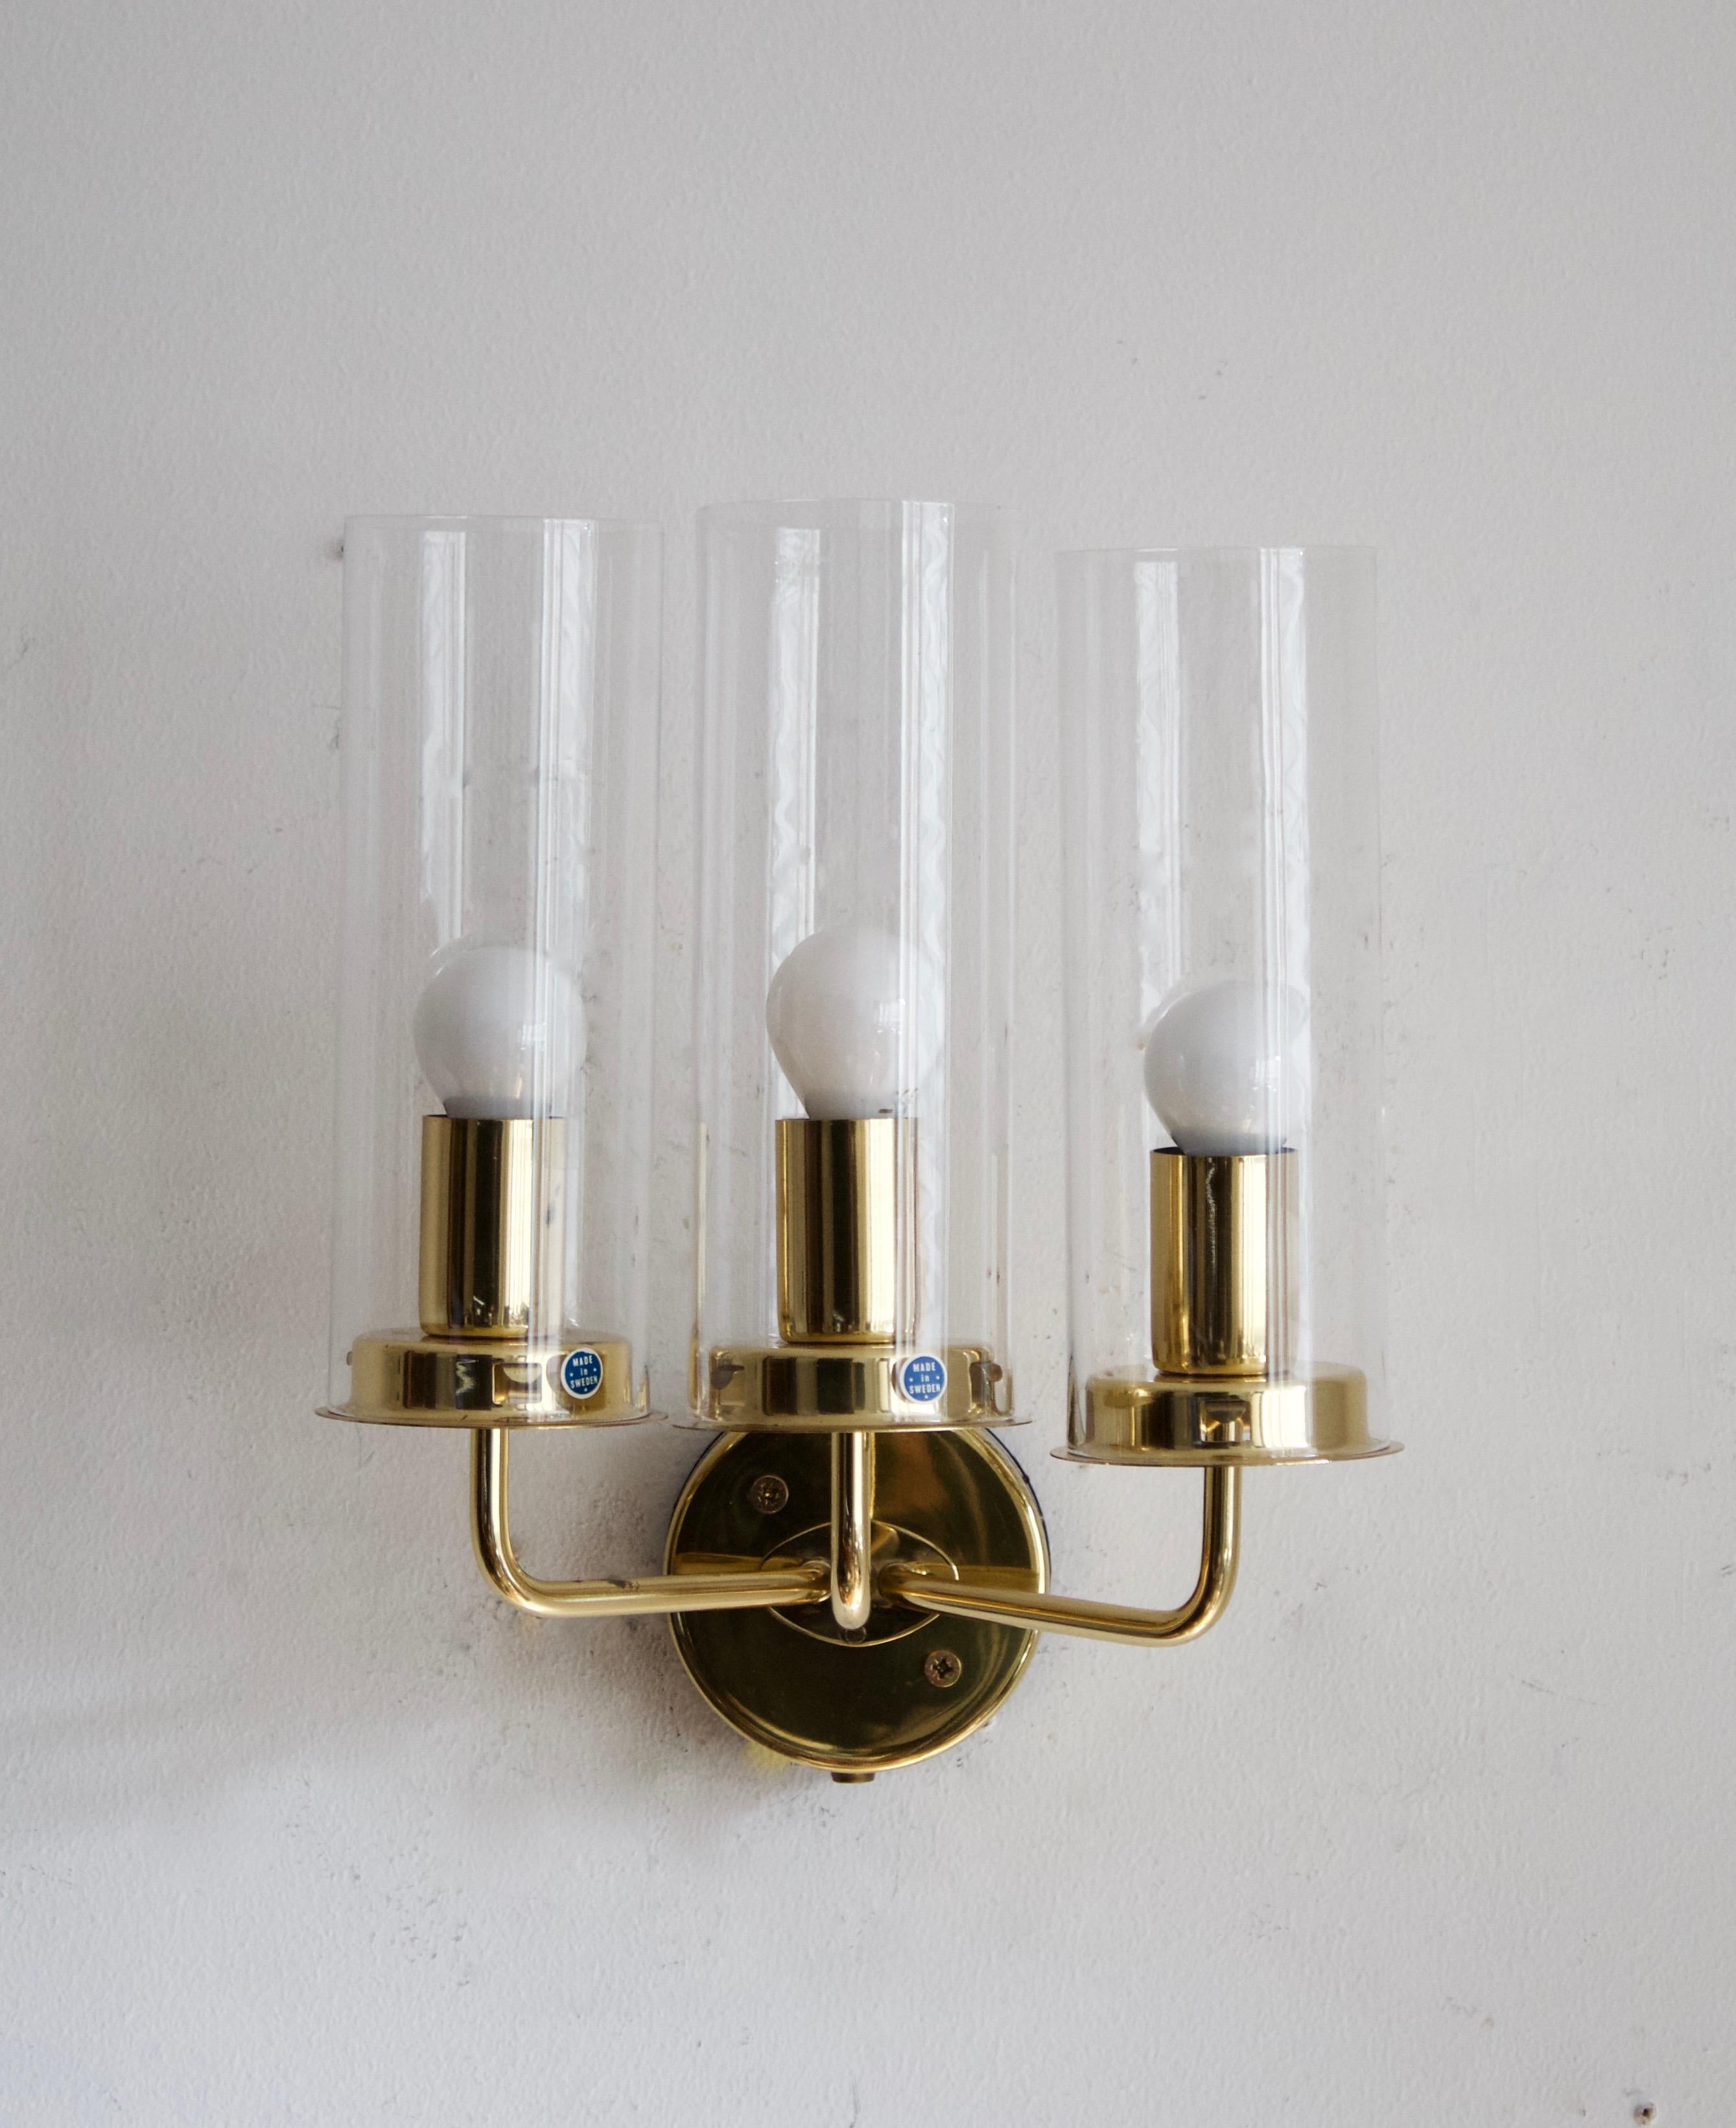 A pair of three-armed wall lights, designed by Hans-Agne Jakobsson for his own firm in Markaryd, Sweden. c. 1960s. Original glass diffusers.